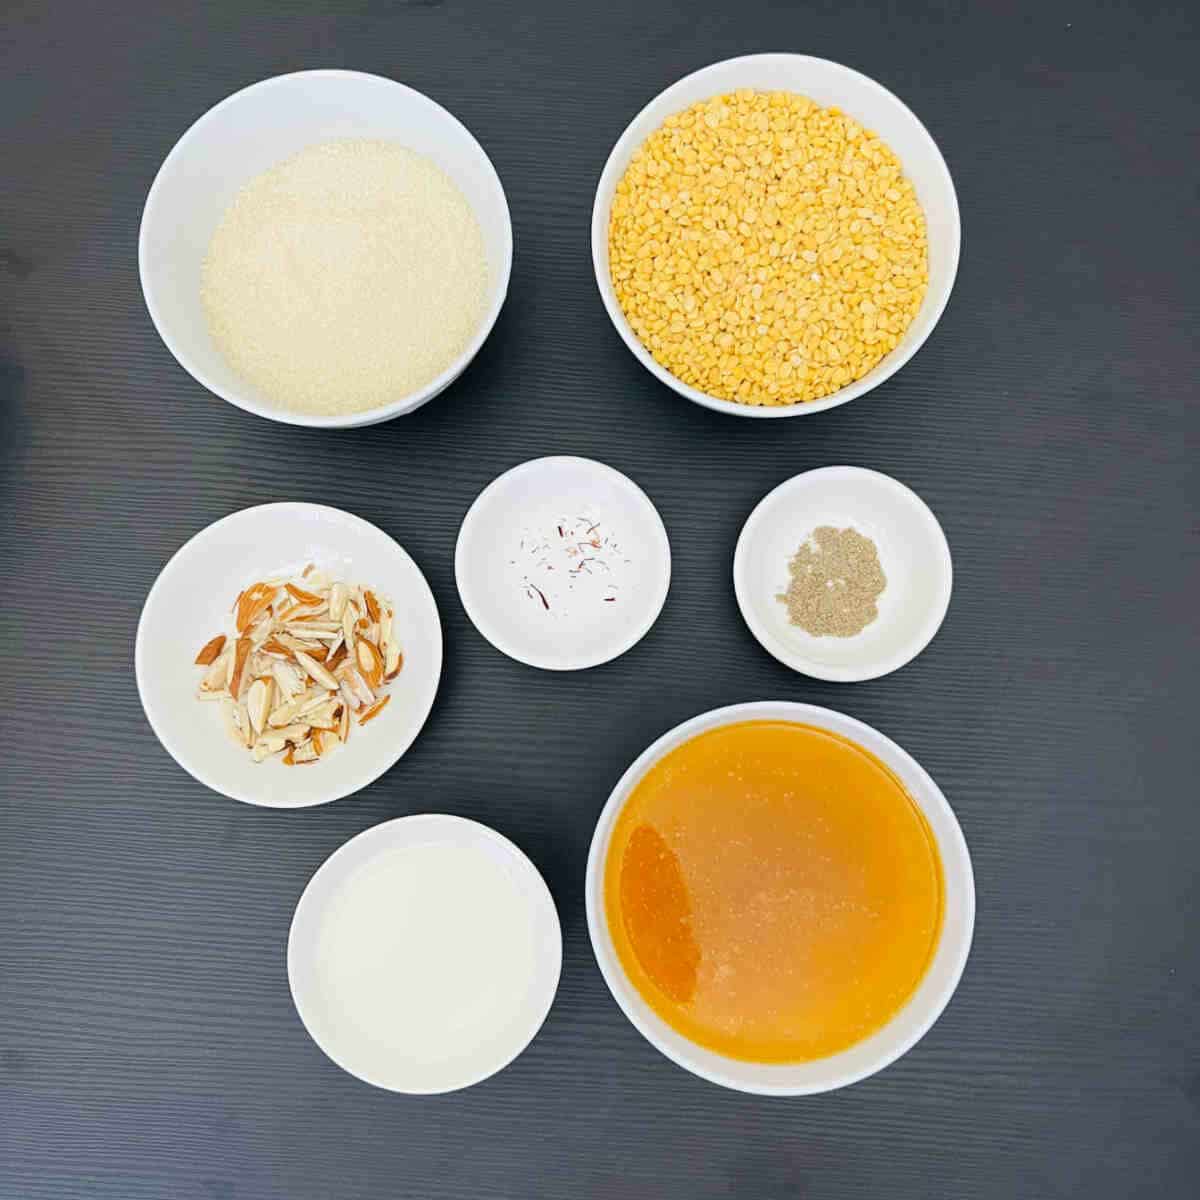 ingredients to make moong dal halwa in instant pot.